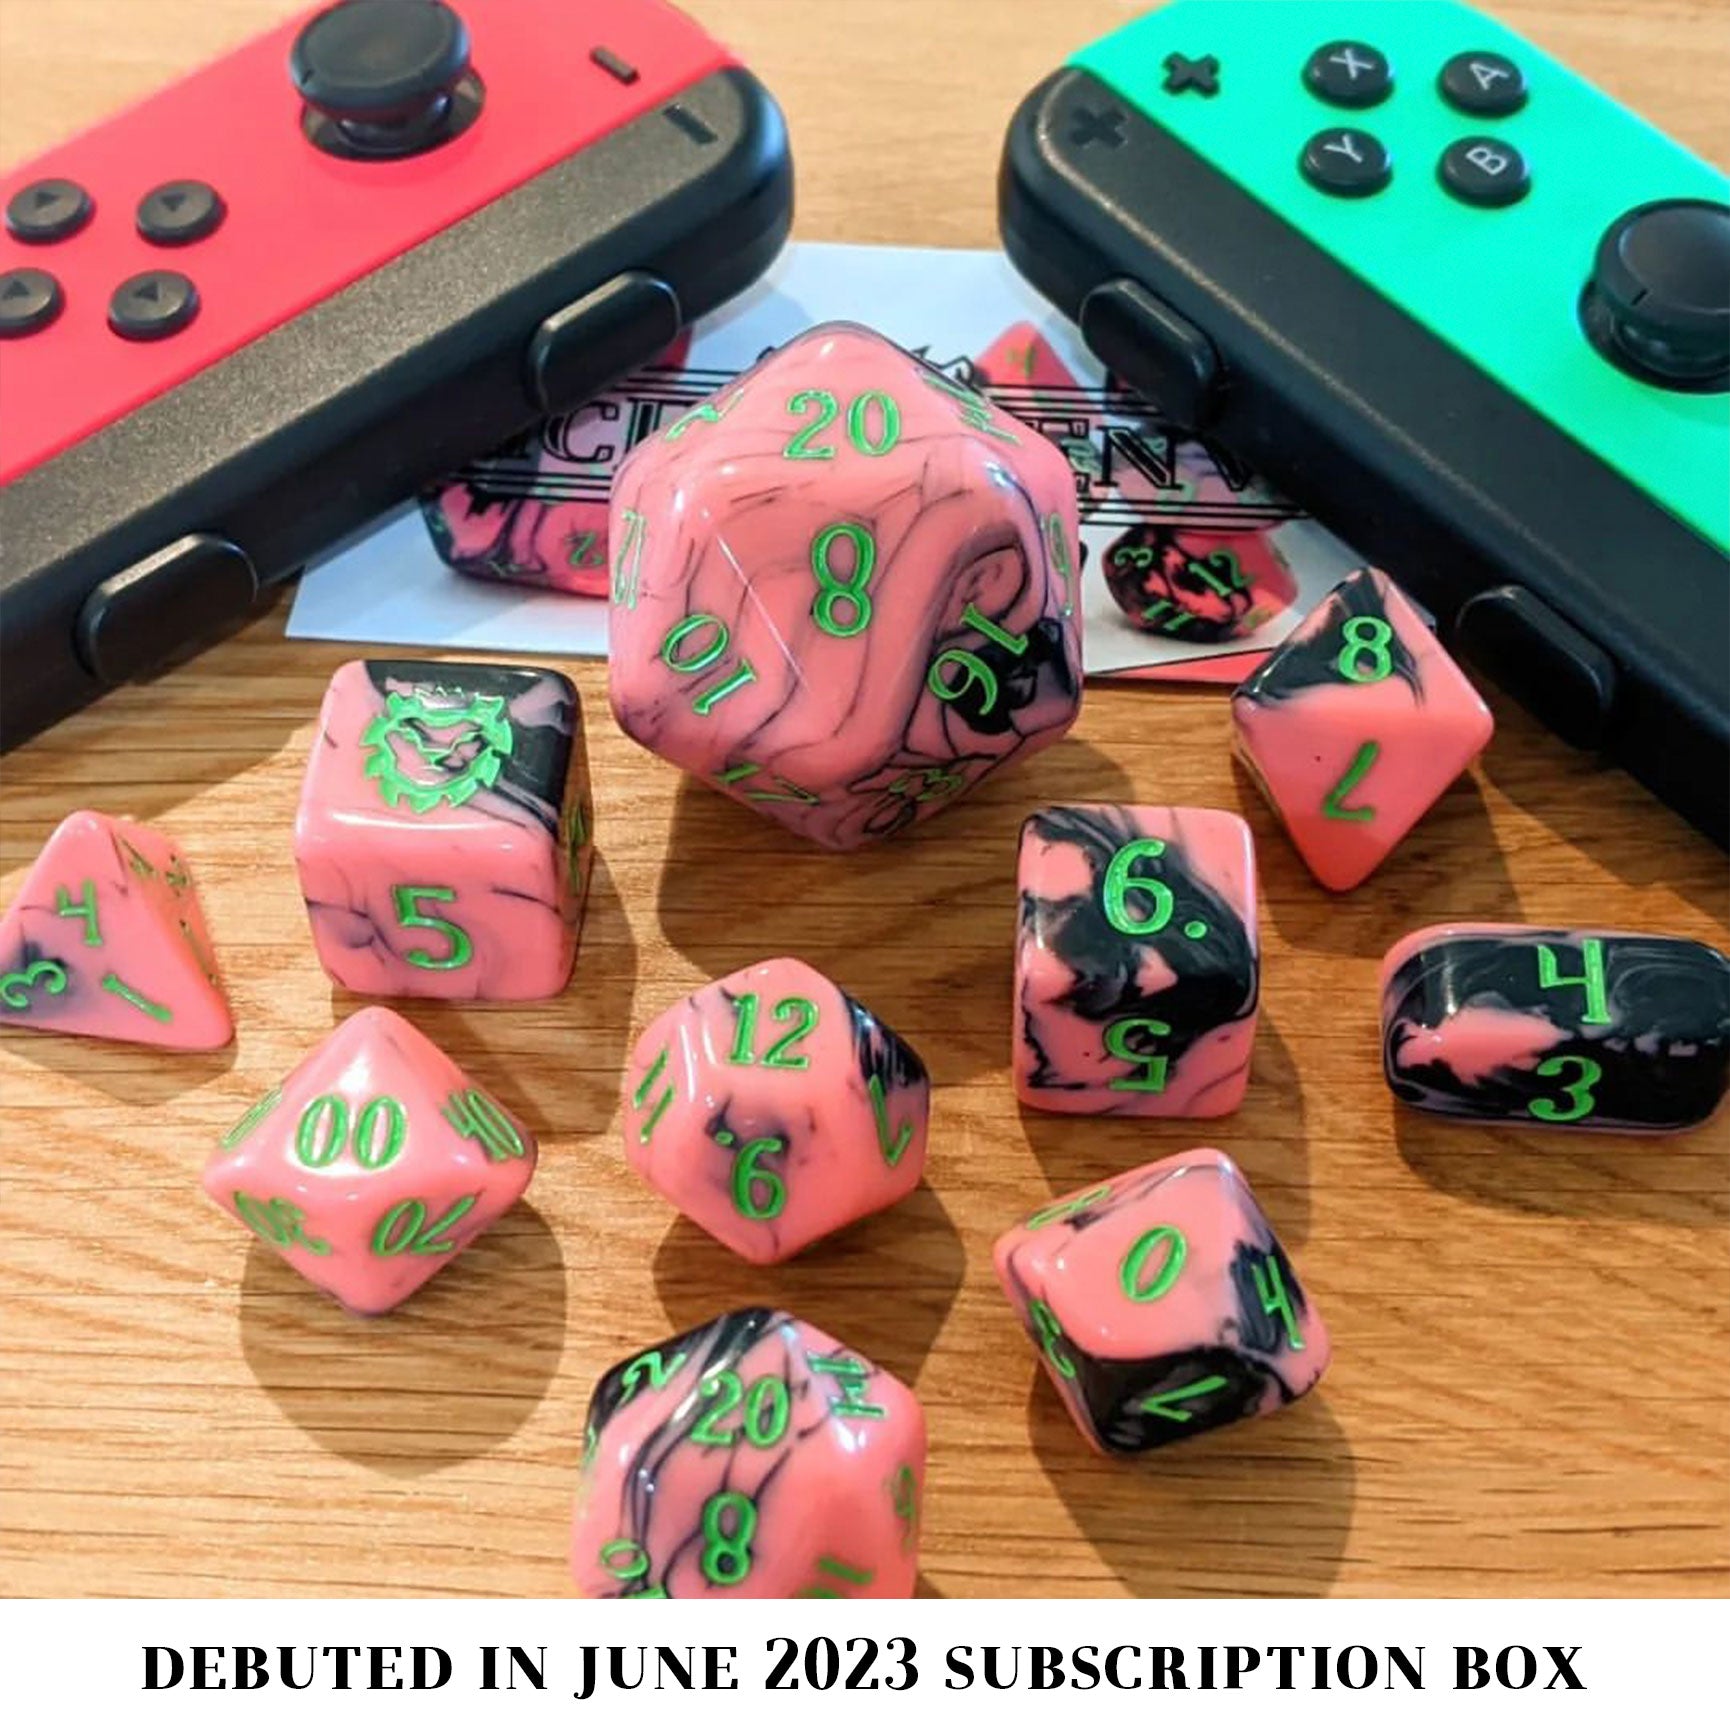 Arcade Bar is a 10-piece set of pink resin dice swirled with black and inked in neon green.